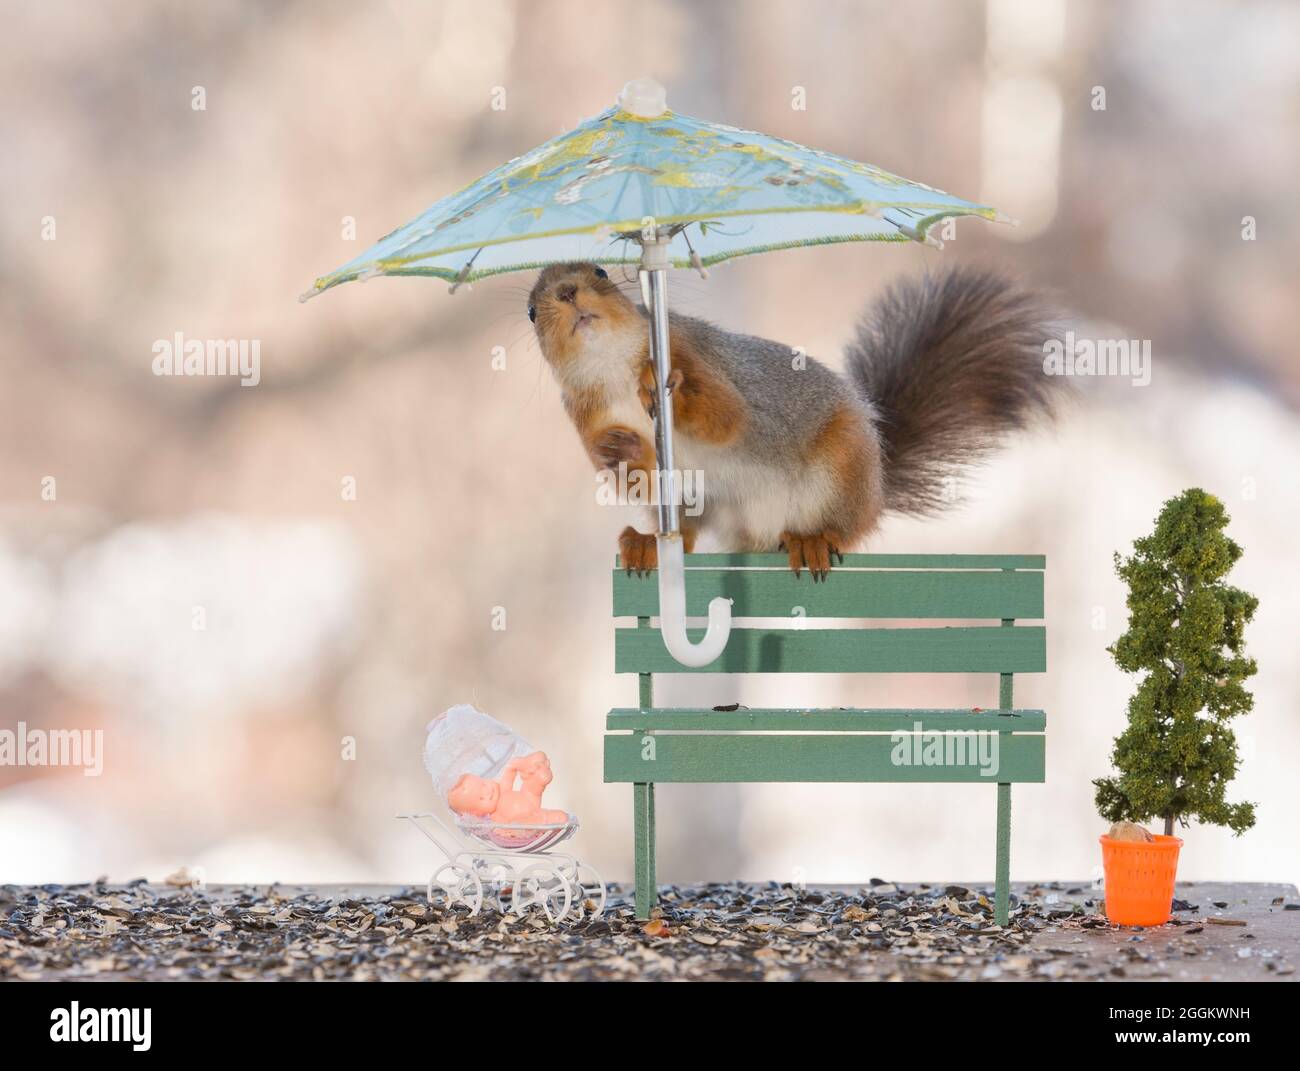 red squirrel is holding an umbrella on an bench Stock Photo